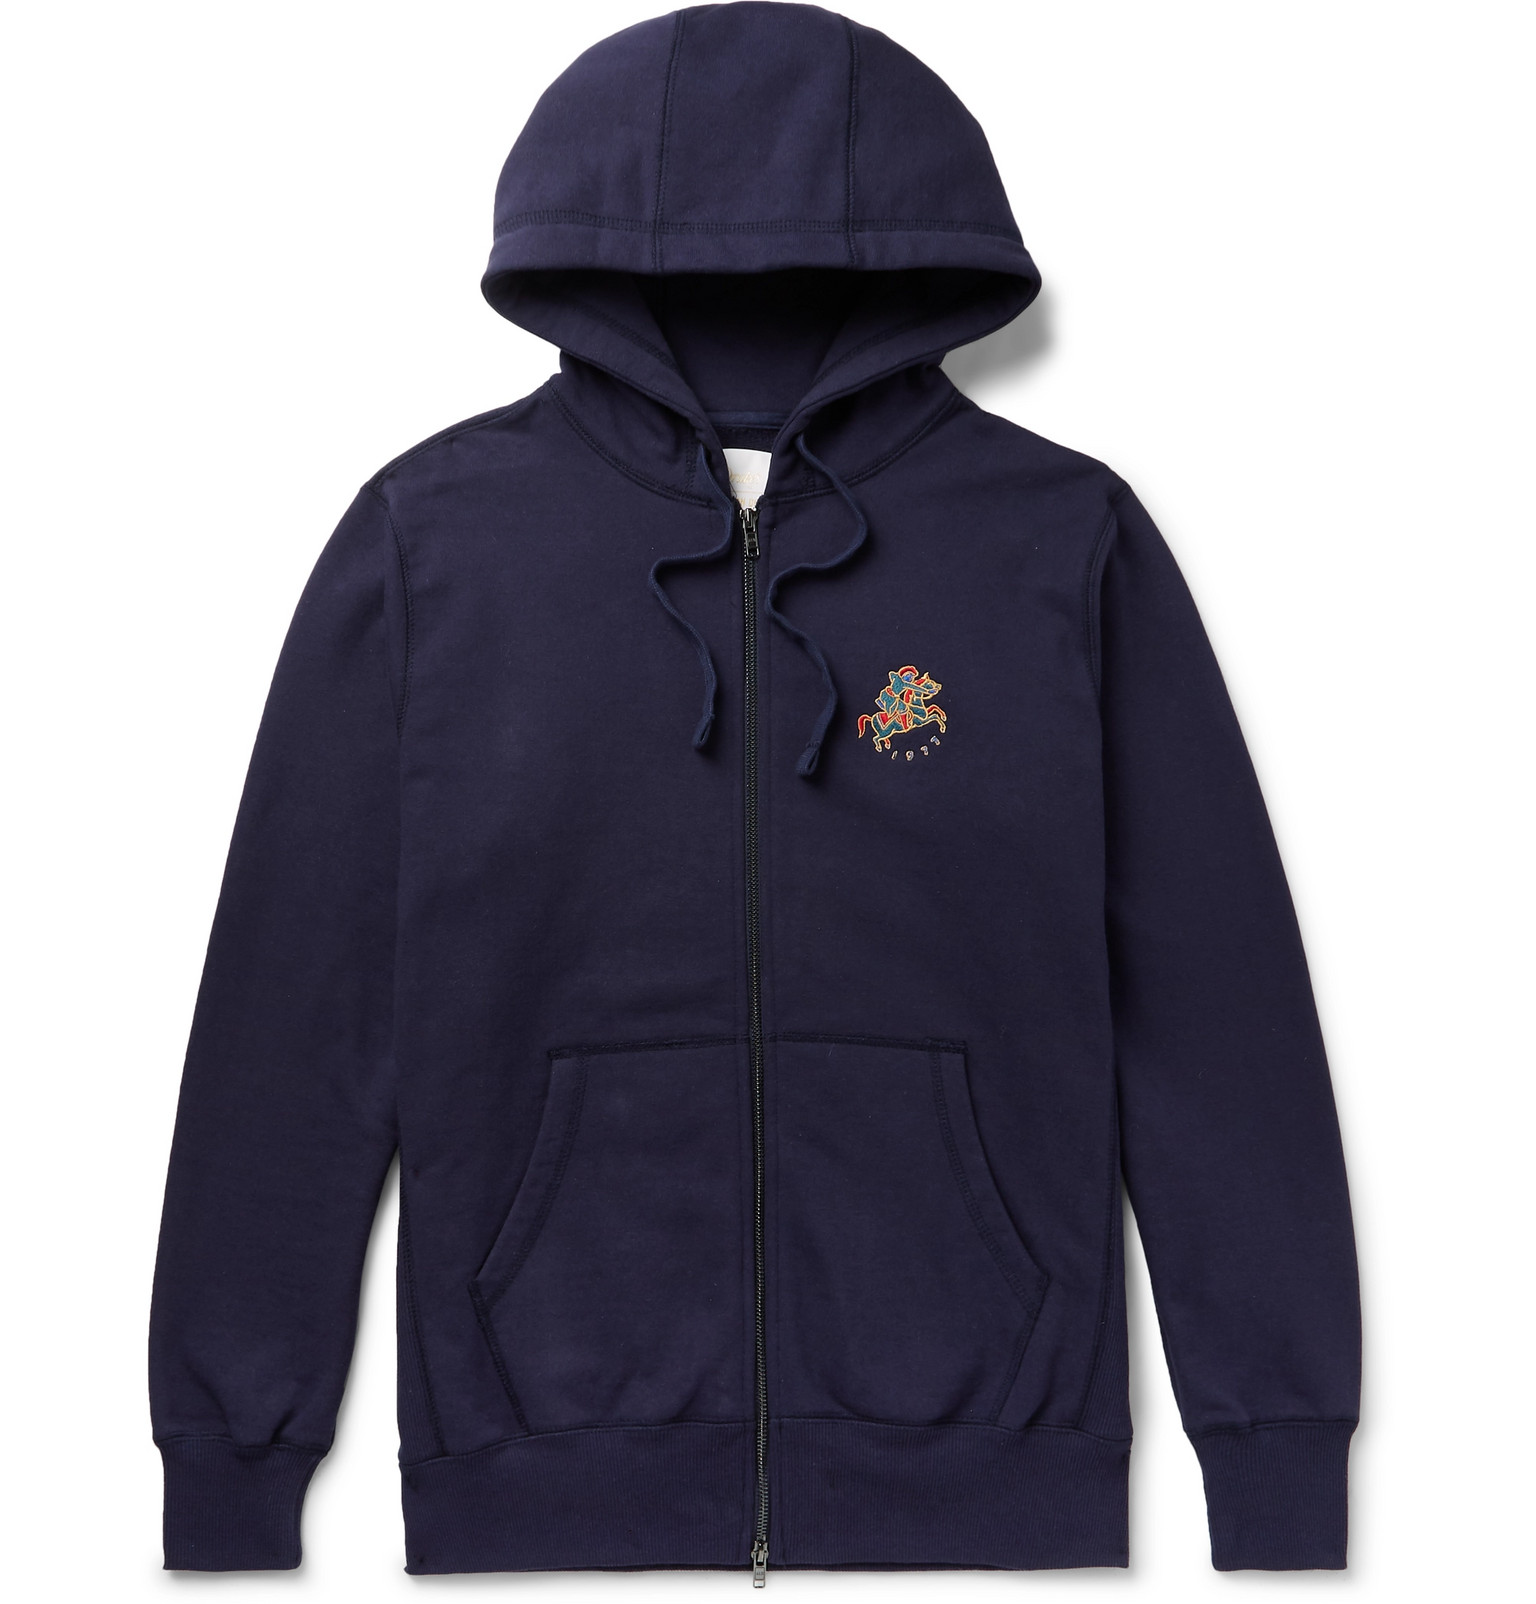 Aime Leon Dore x Drakes Patch Hoodie – The Wicker Bee